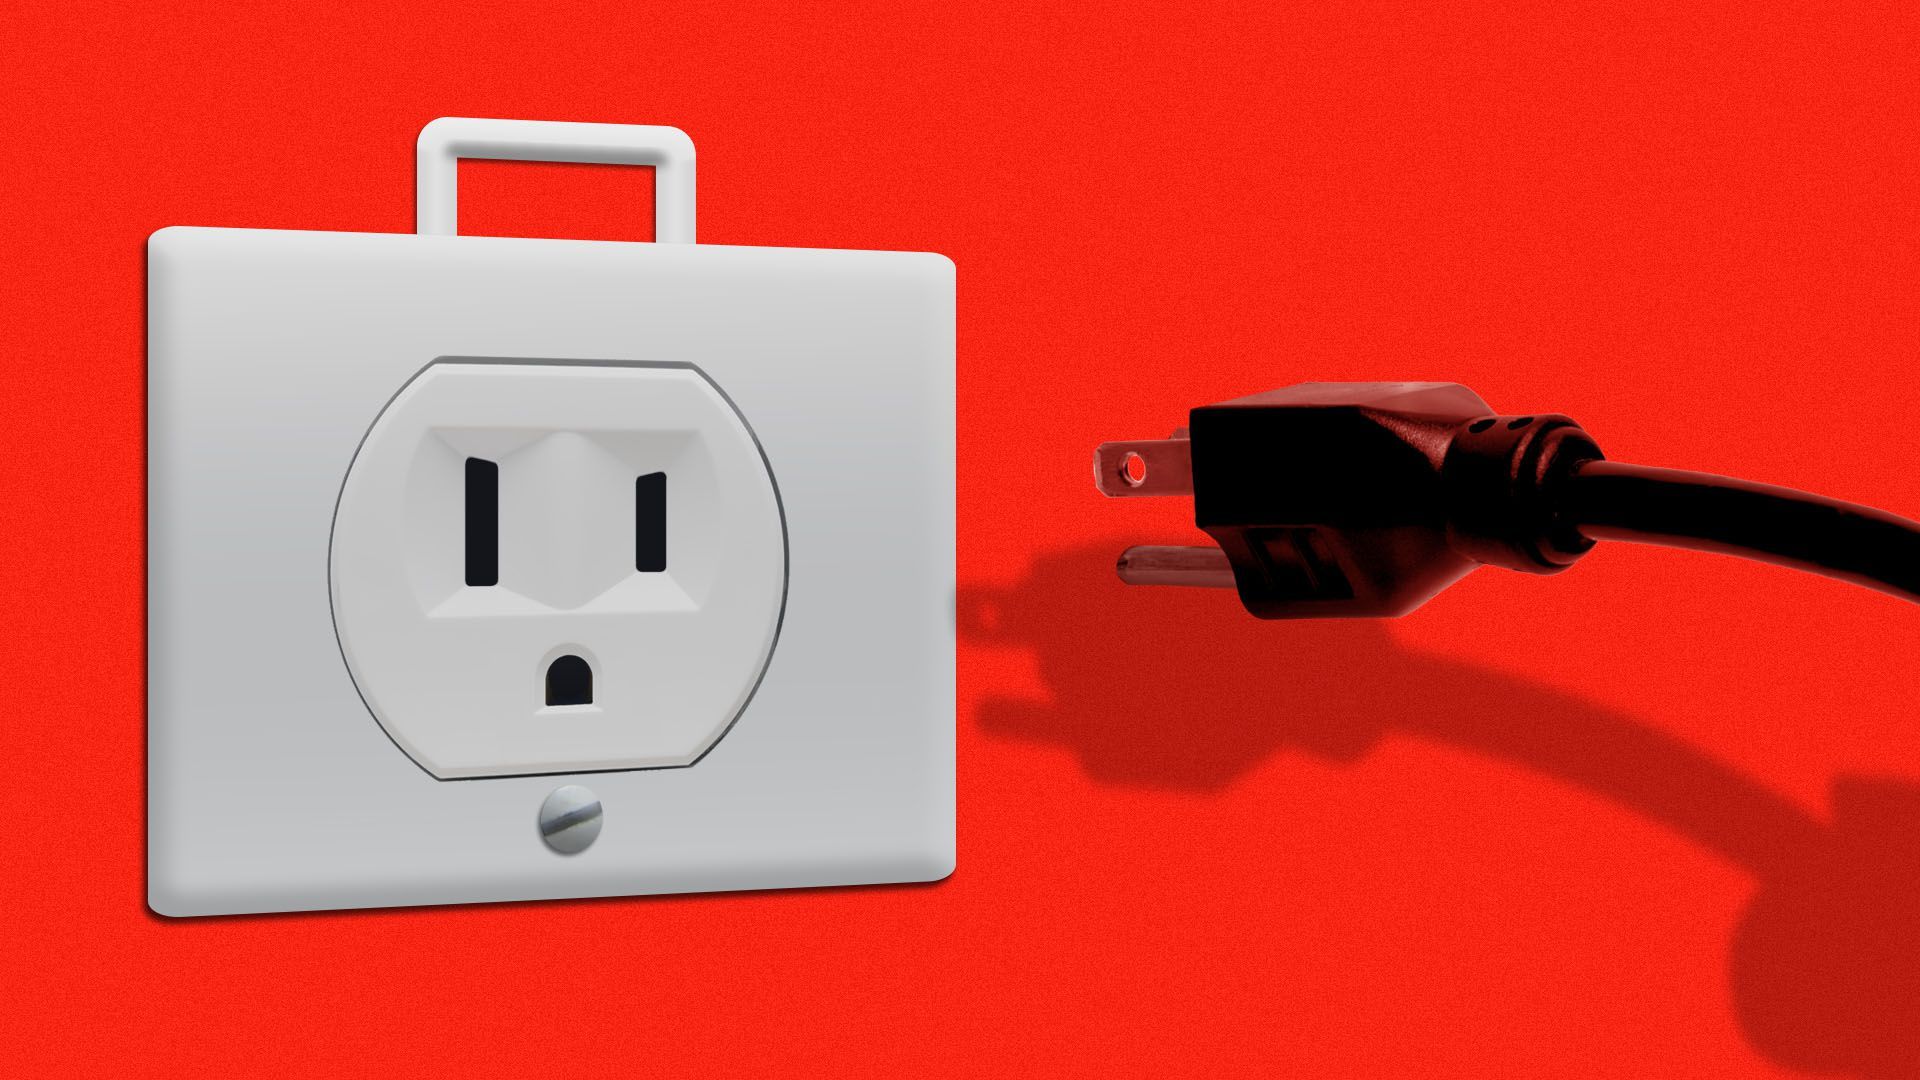 Illustration of an angry-looking briefcase-shaped power outlet with the chord being pulled out